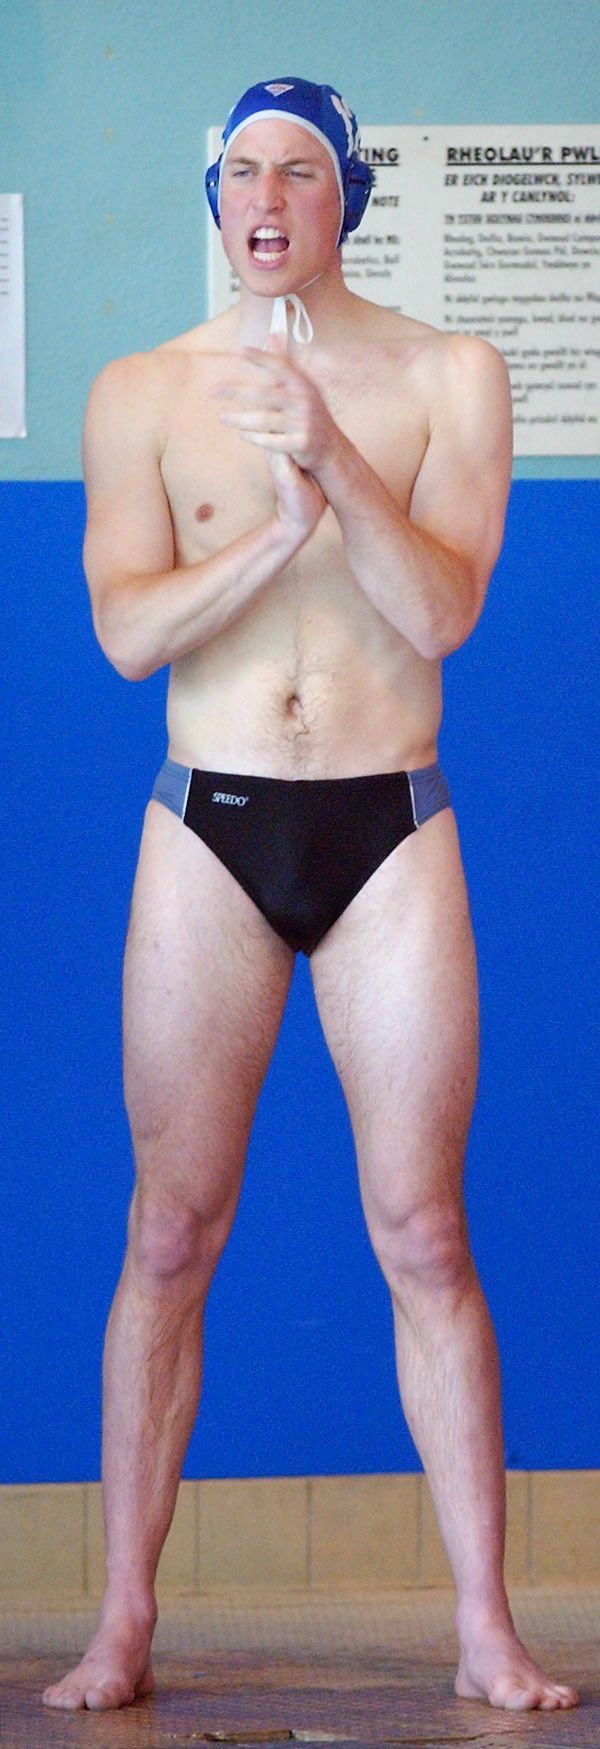 Prince William in swimming shorts